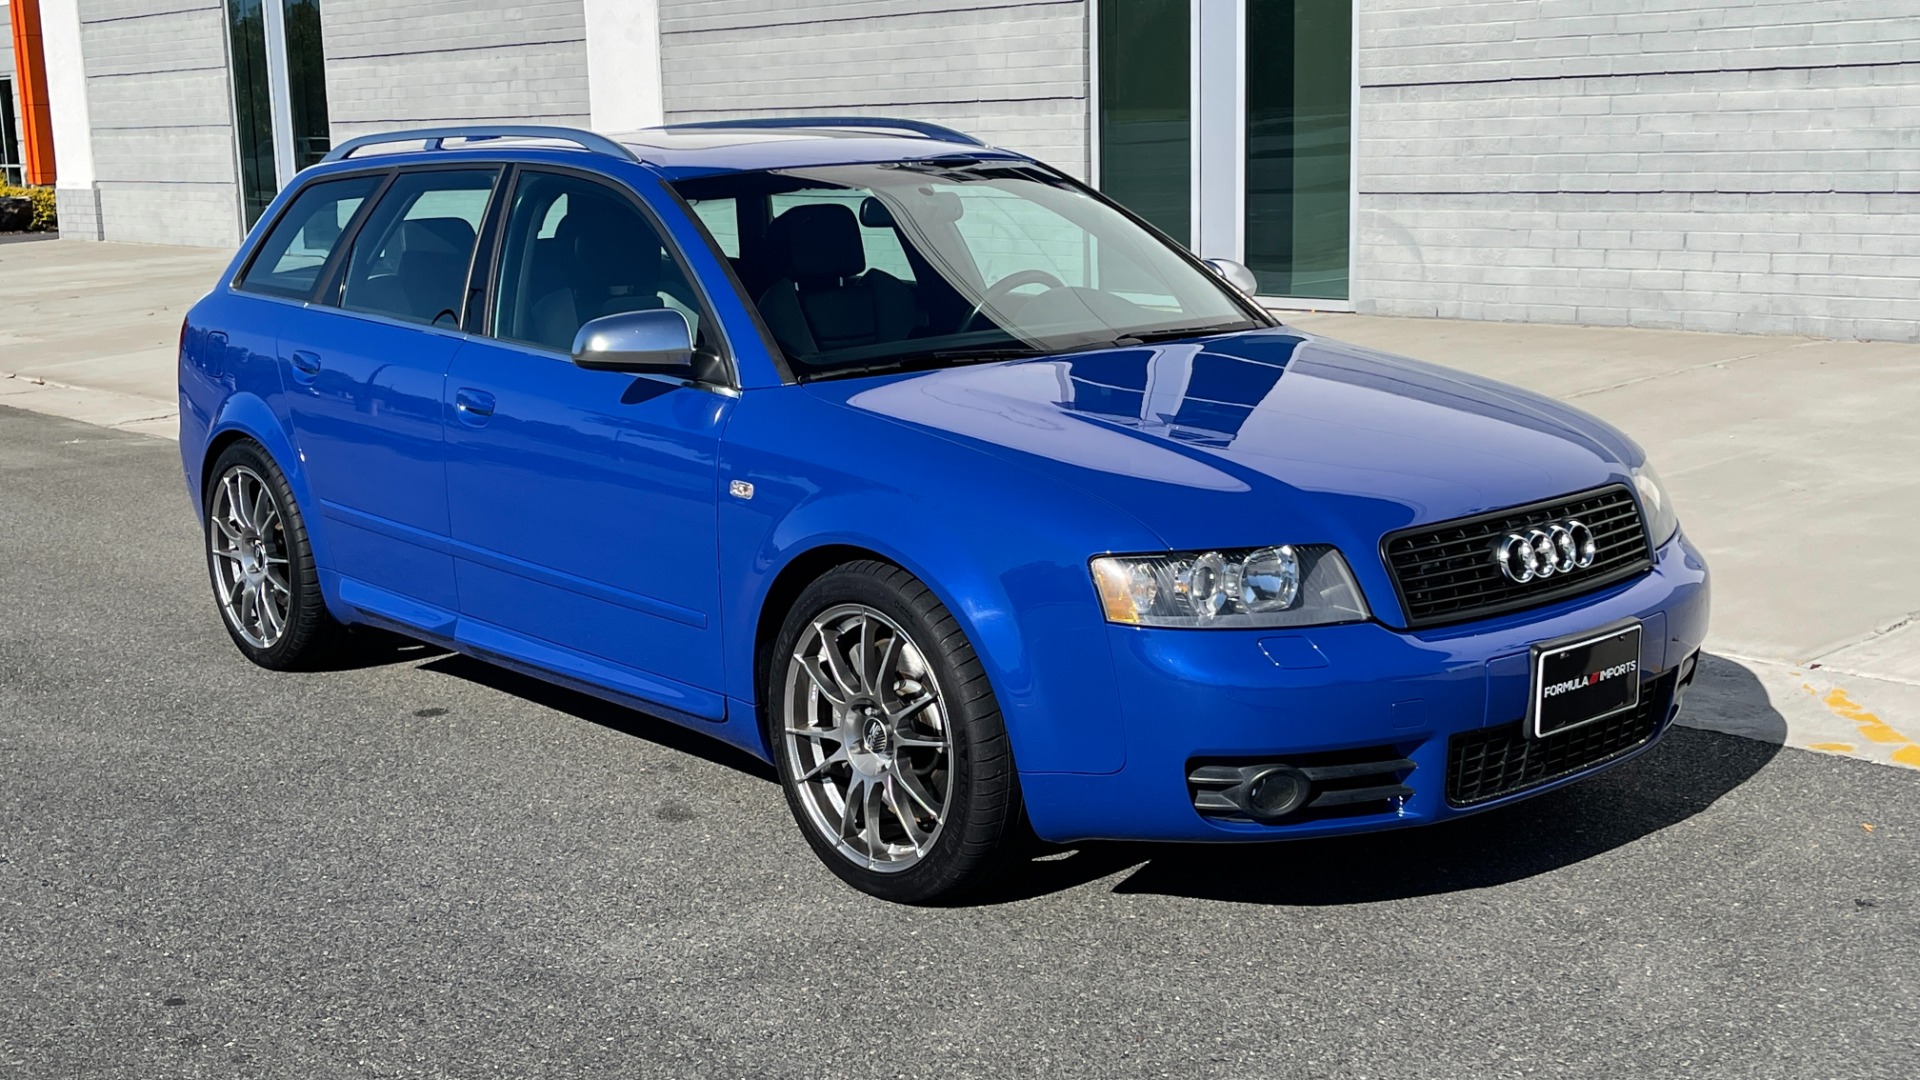 Used 2004 Audi S4 AVANT QUATTRO / VF500 SUPERCHARGED / 4.2L V8 / NOGARO BLUE PEARL for sale $32,995 at Formula Imports in Charlotte NC 28227 9